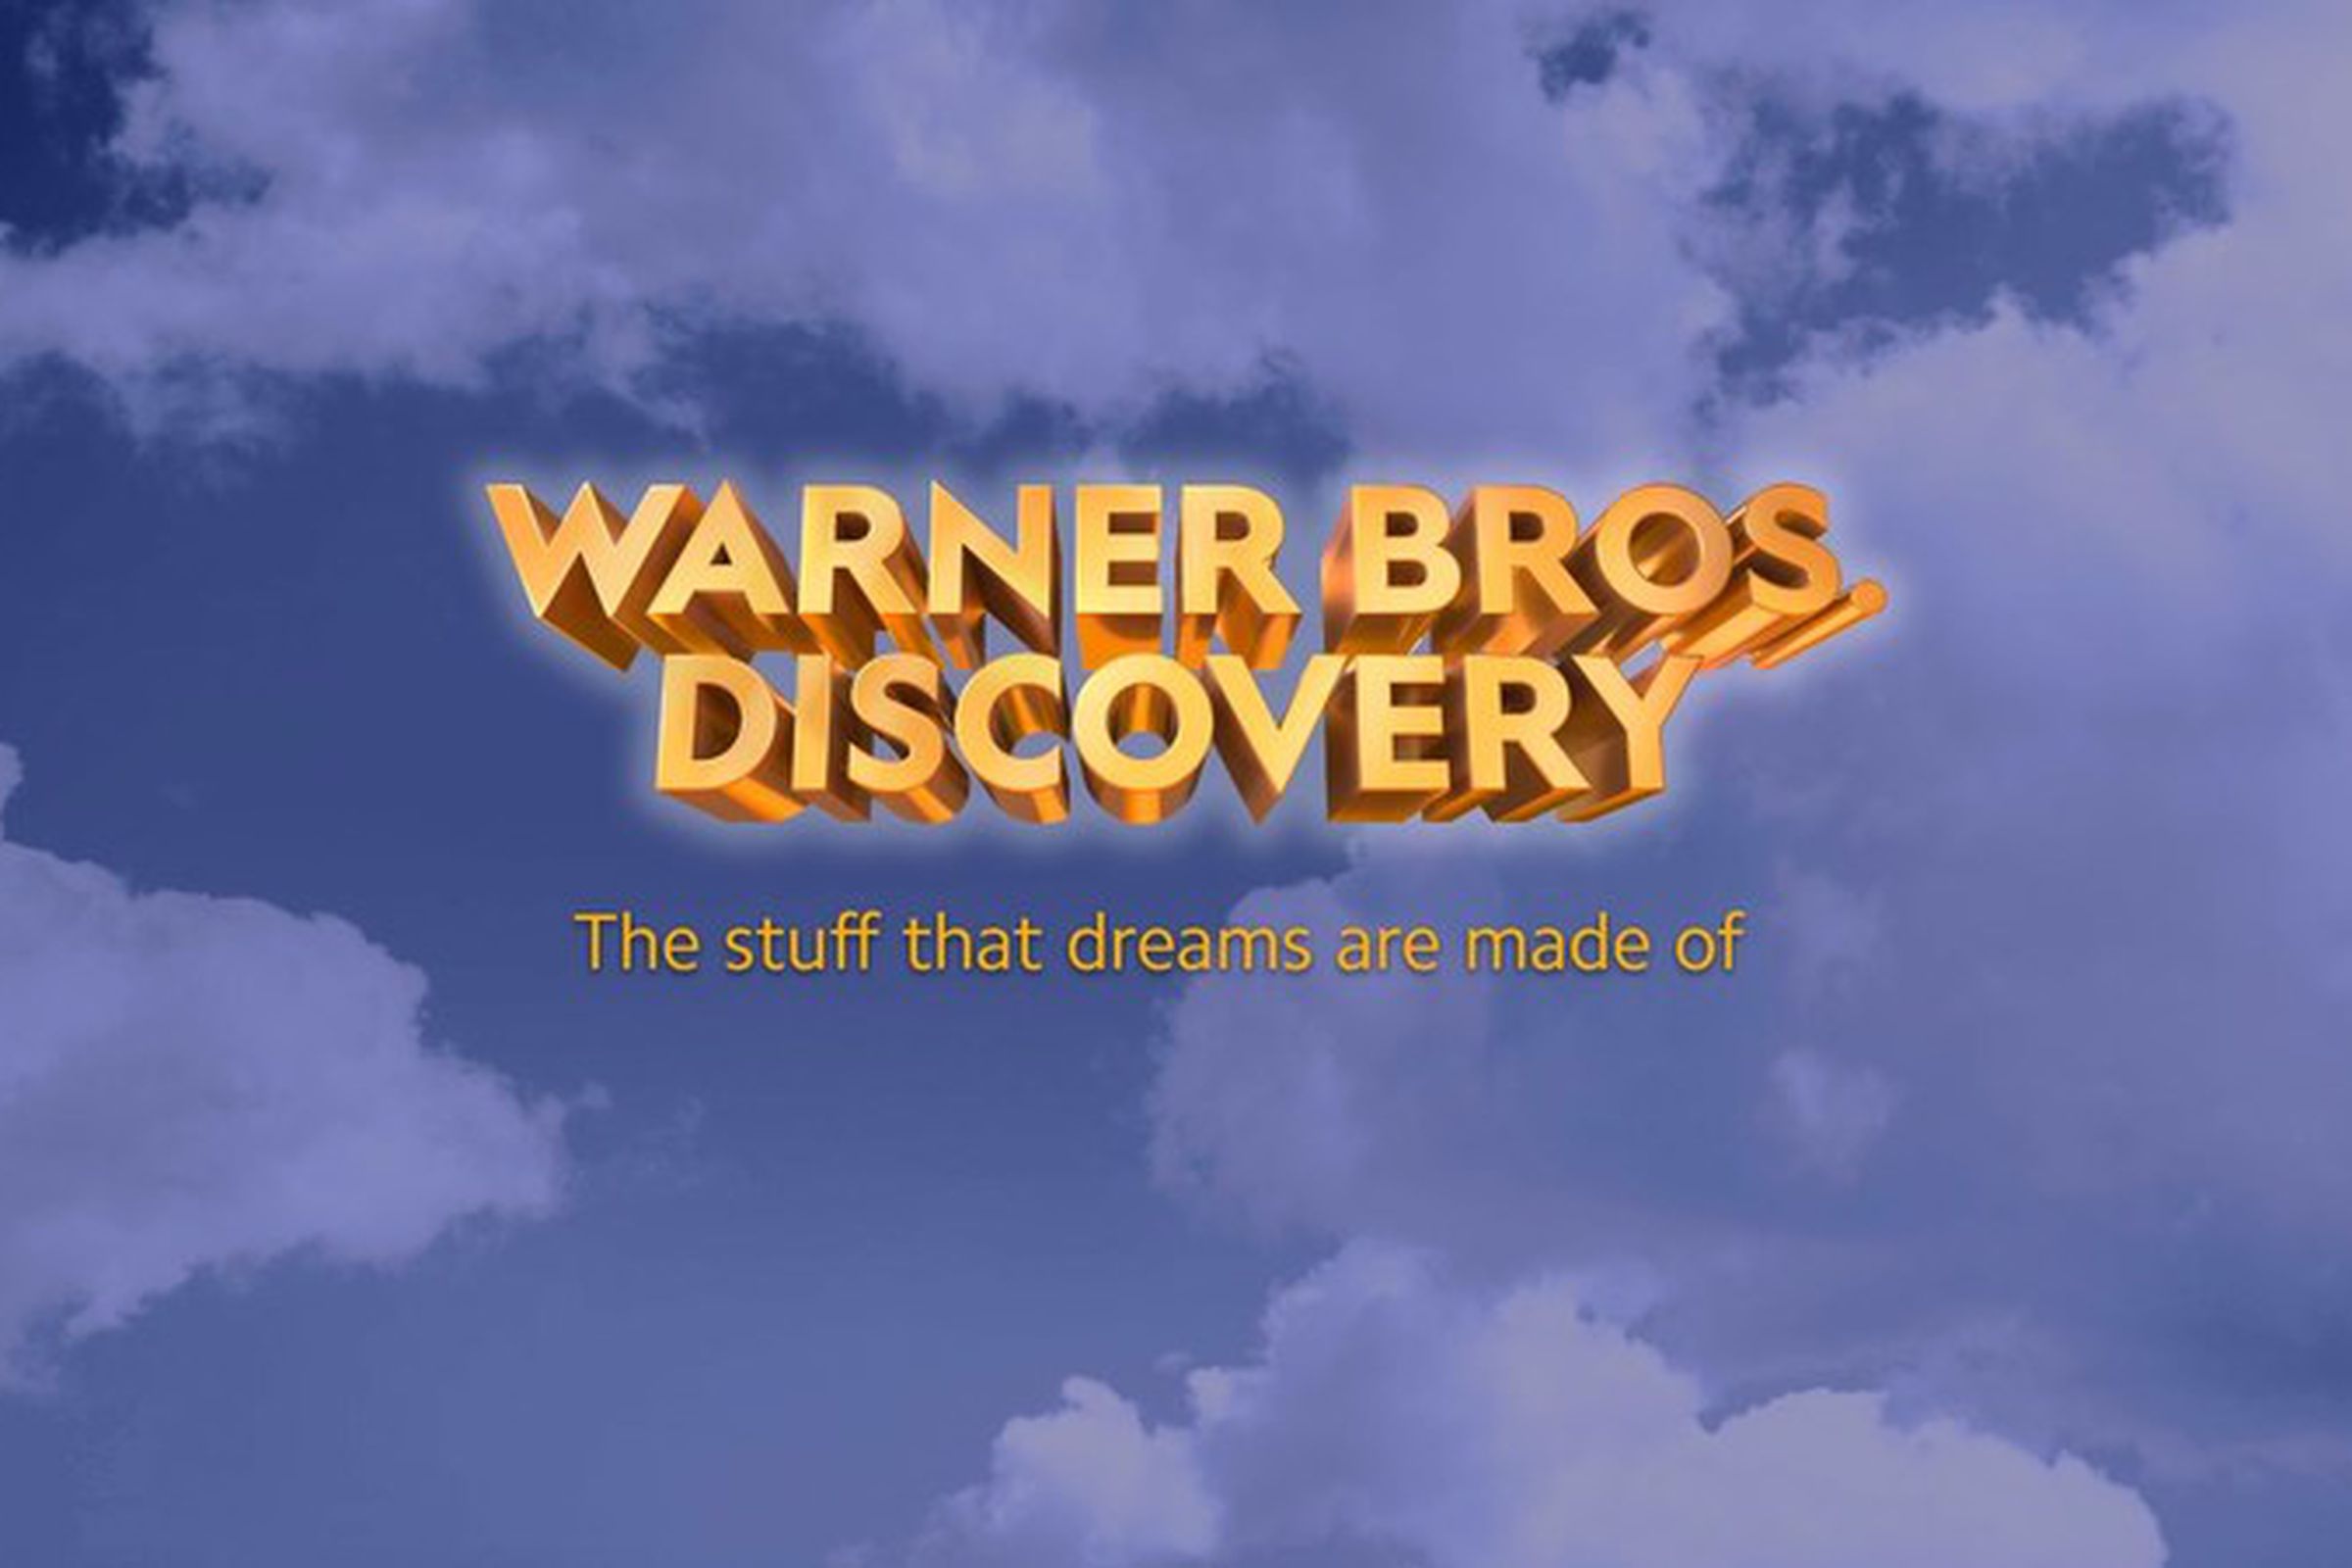 The new logo and slogan for Warner Bros. Discovery